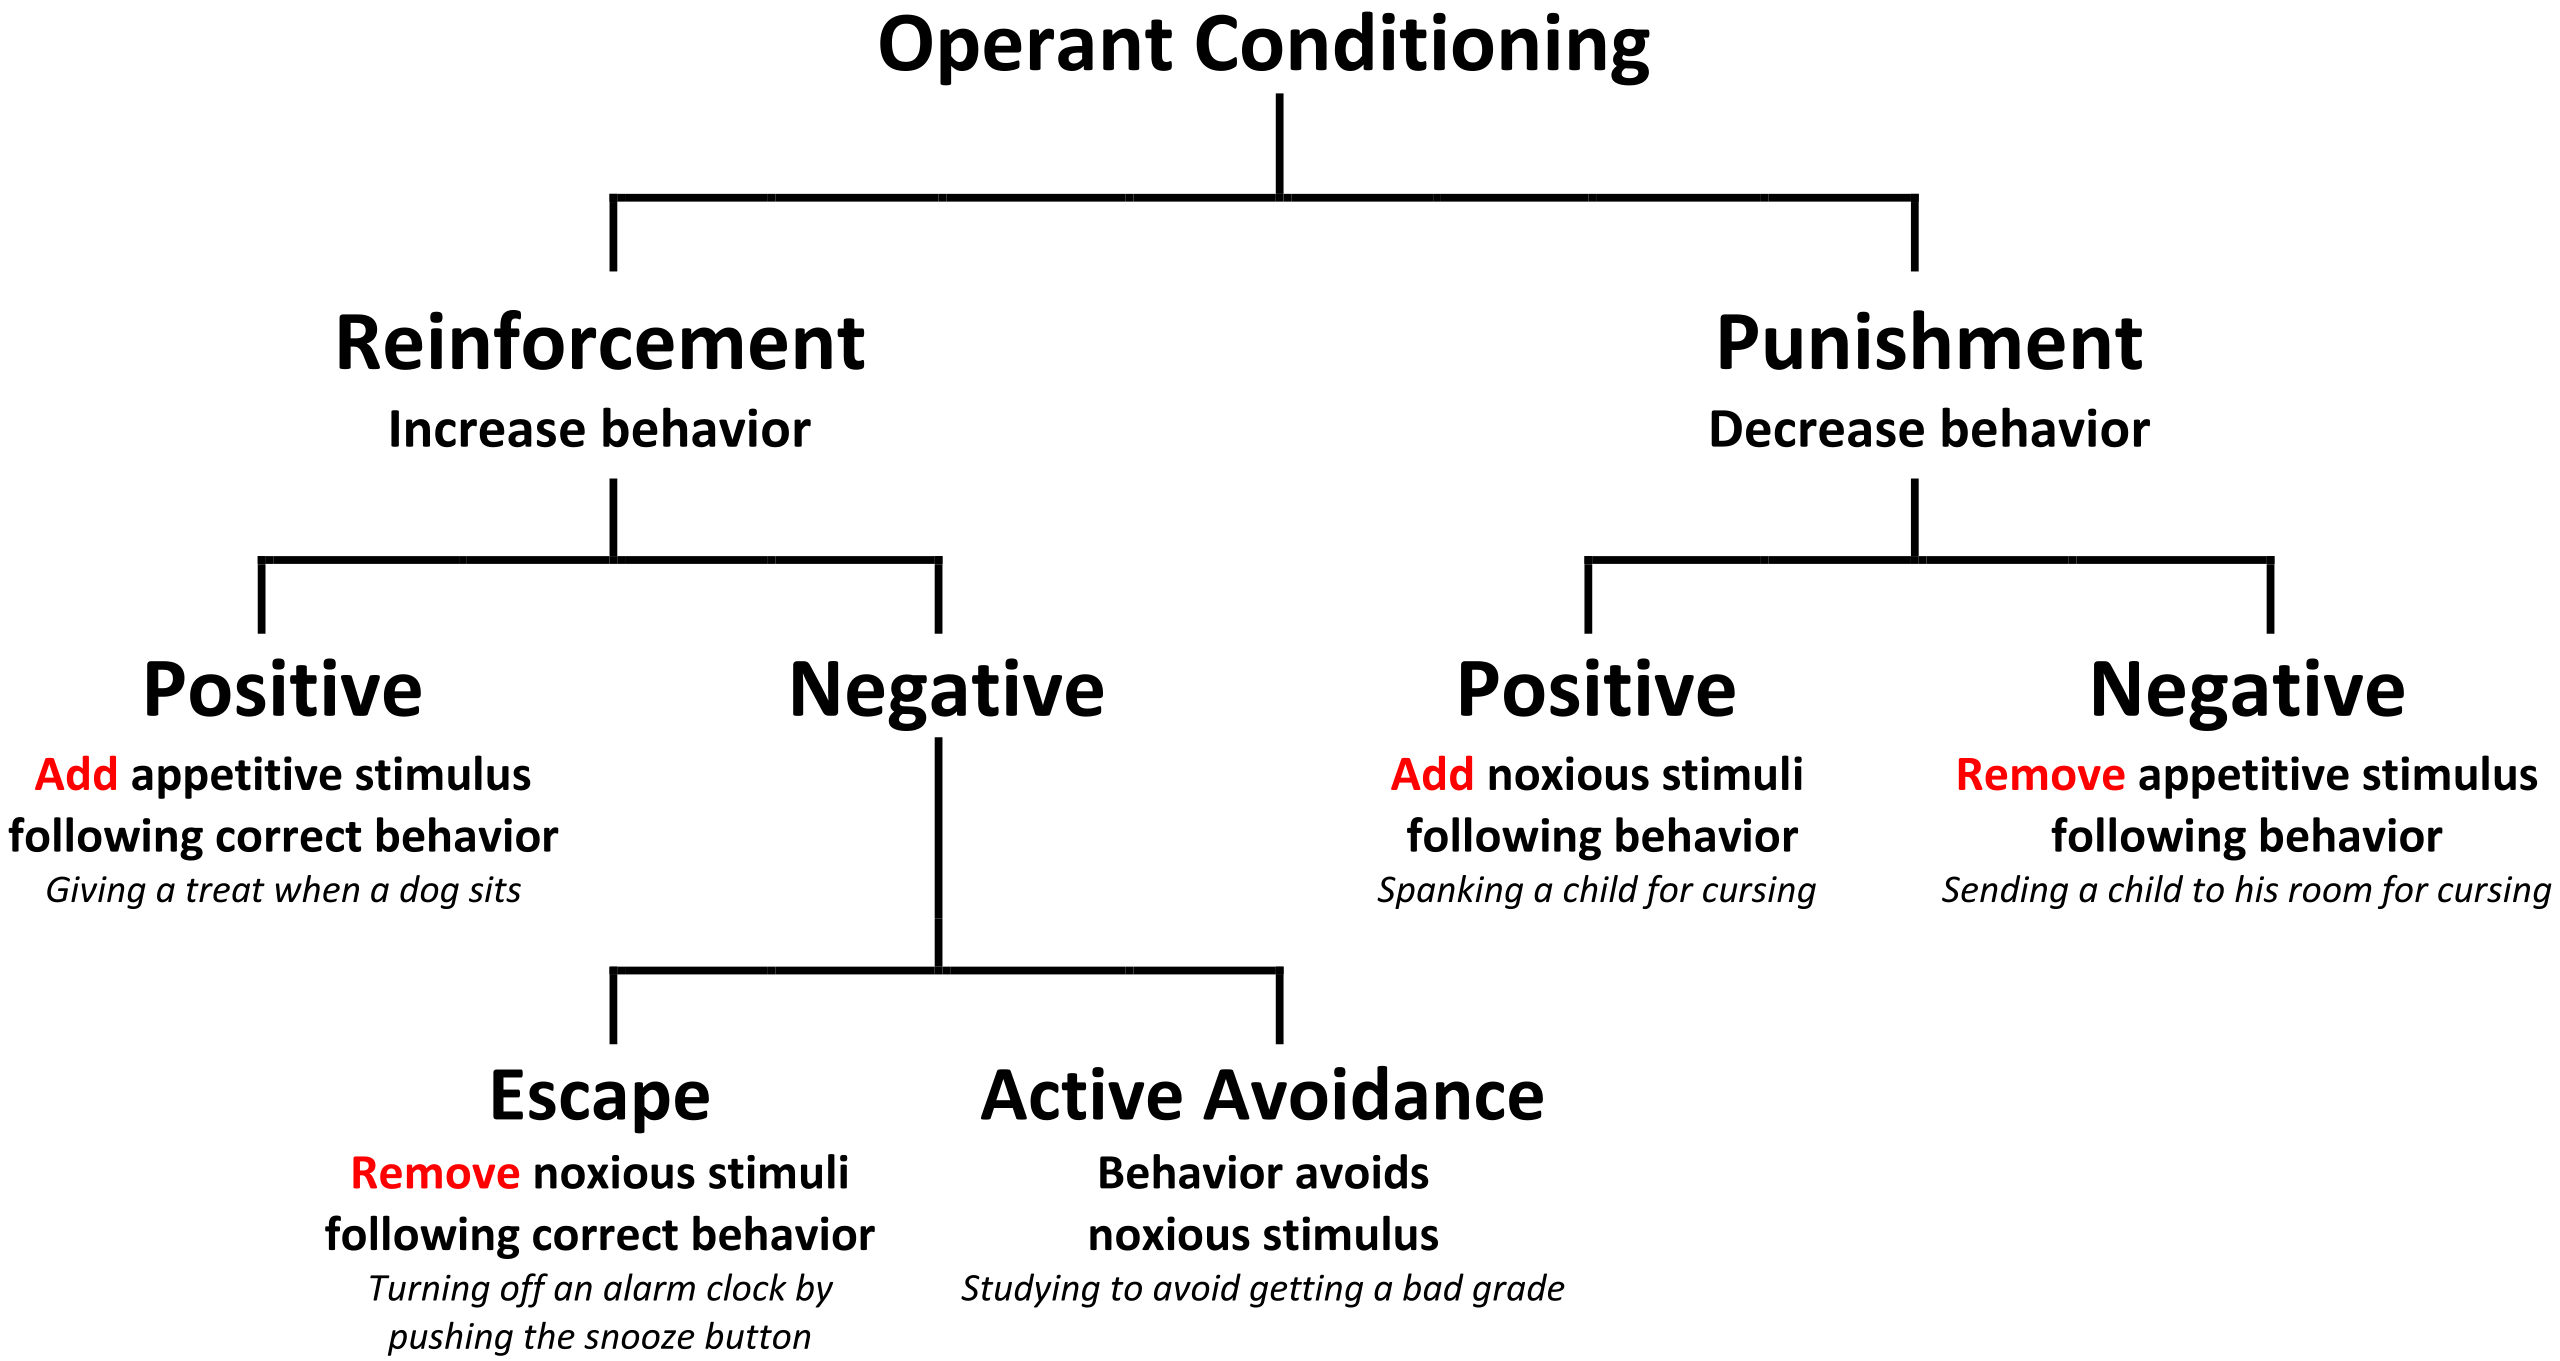 What is operant conditioning